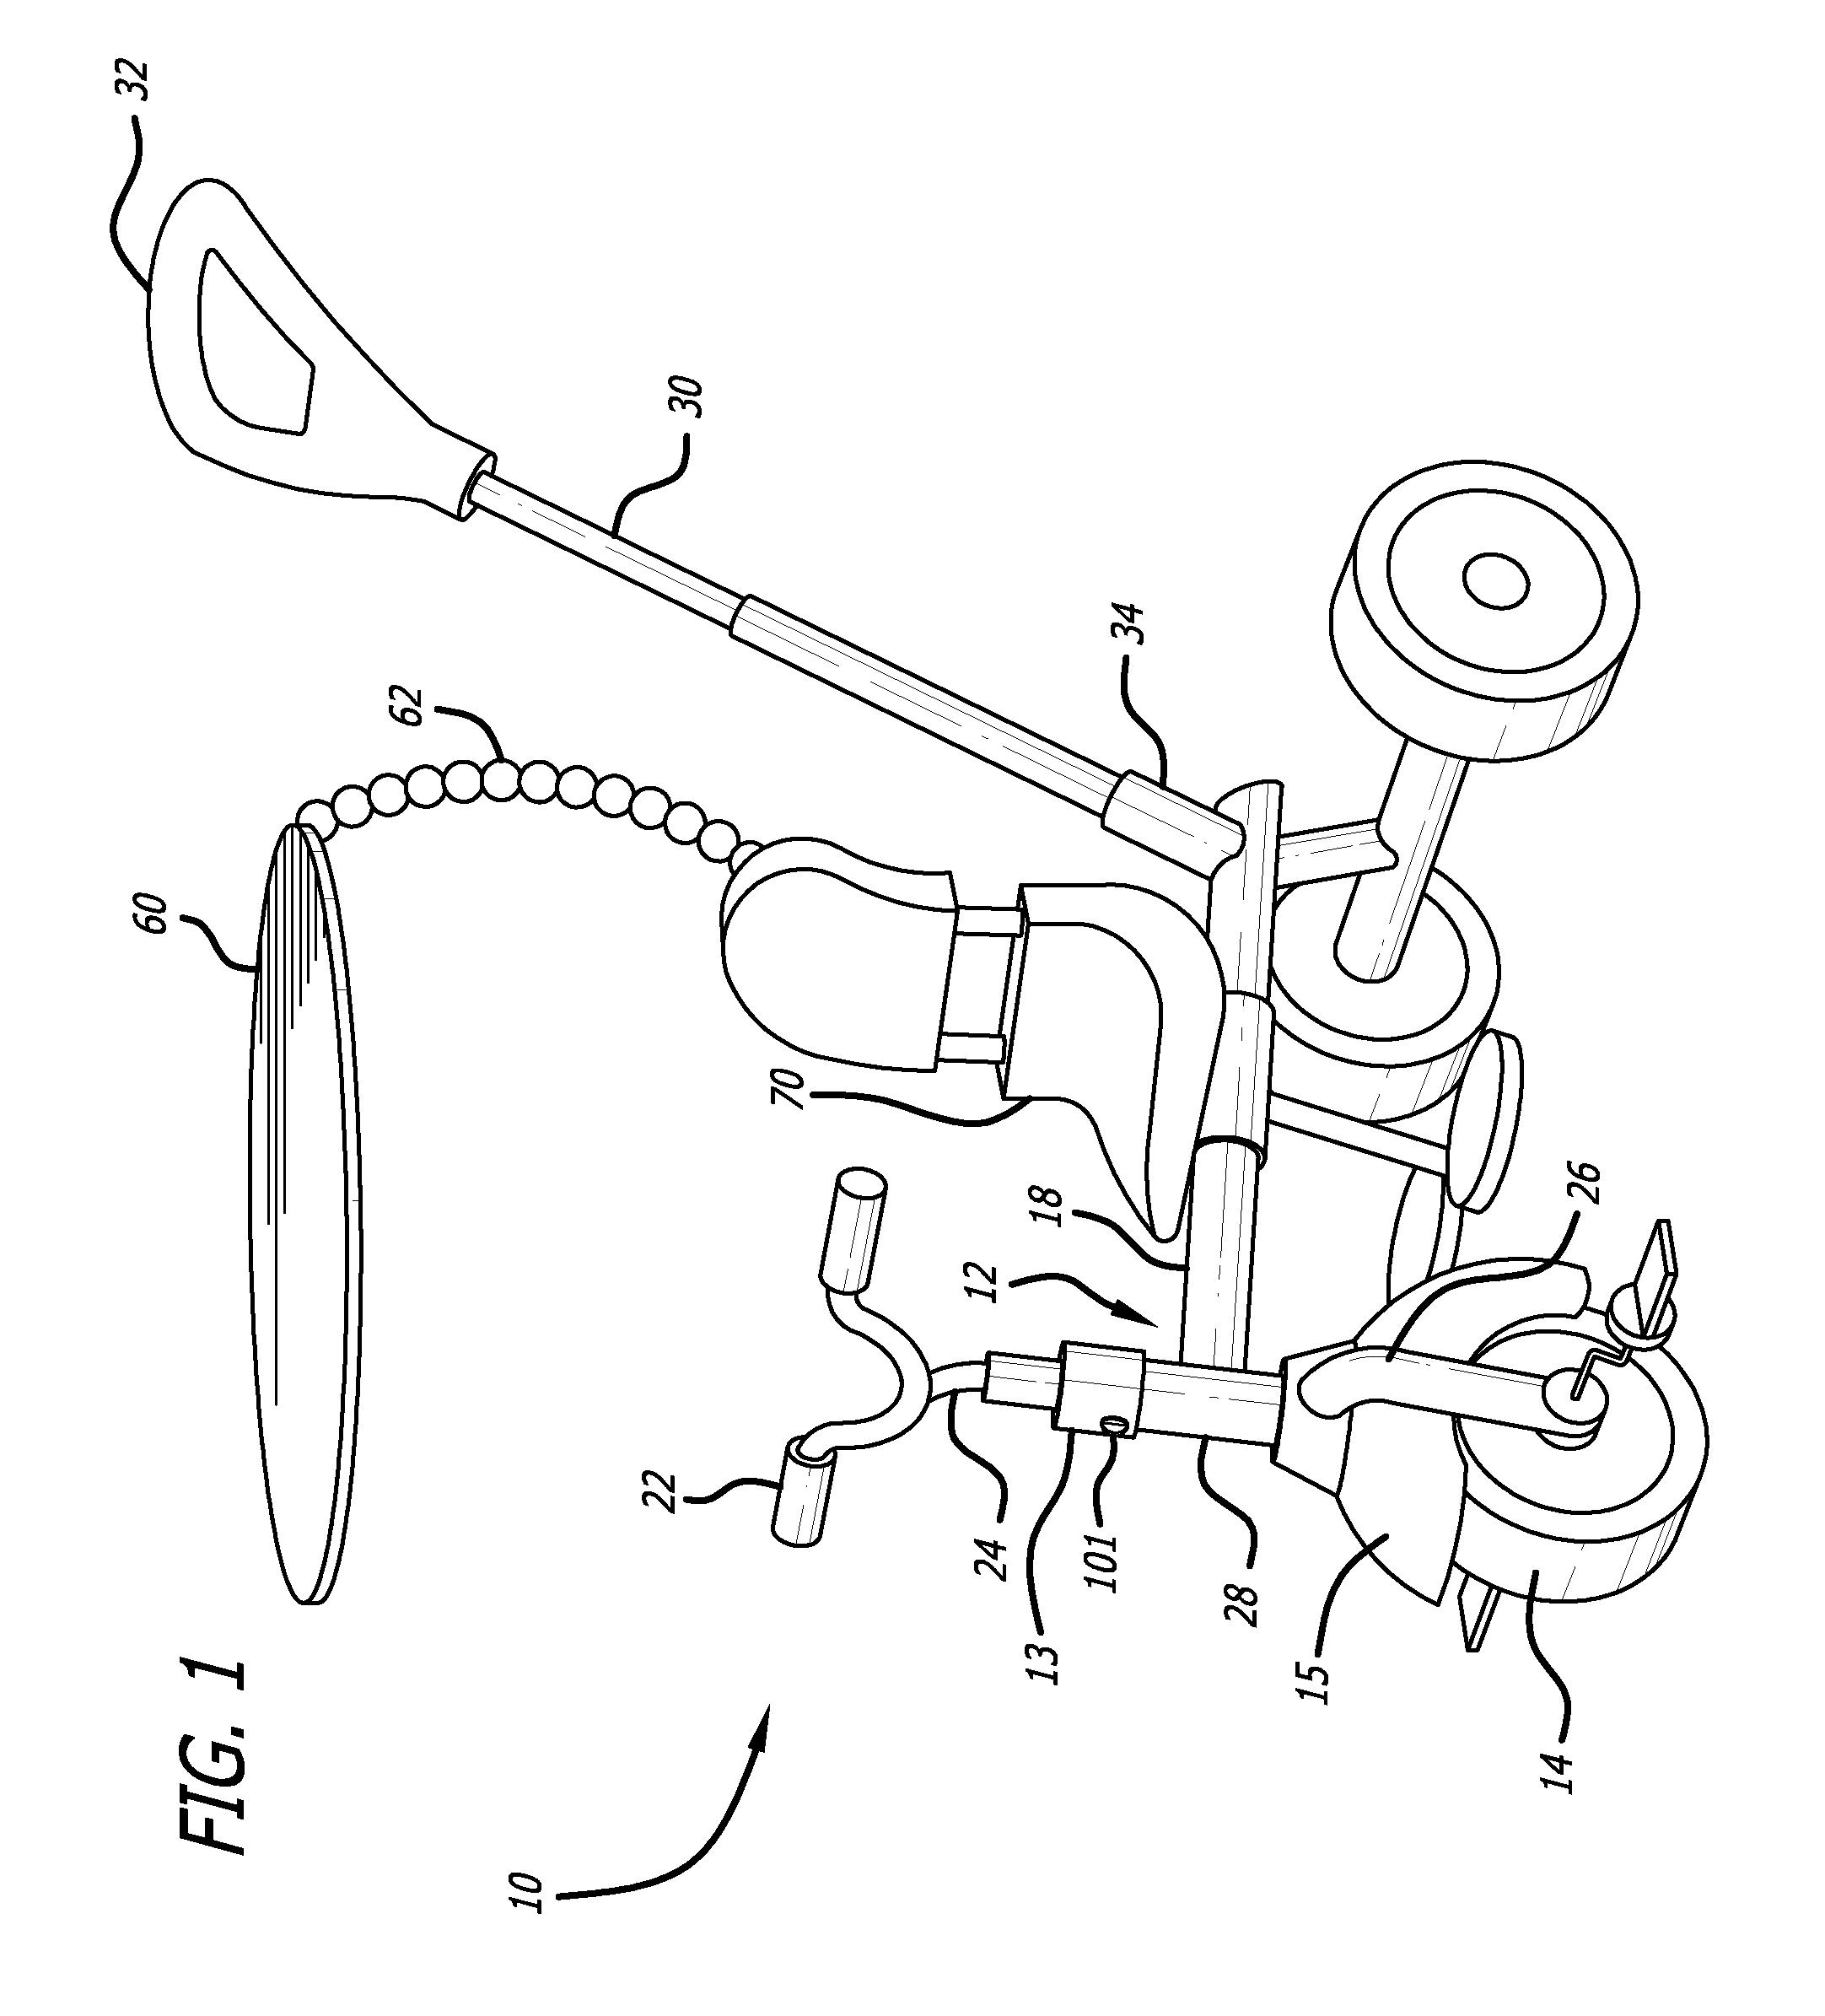 Parent Steerable Tricycle with Internal Steering Limiter